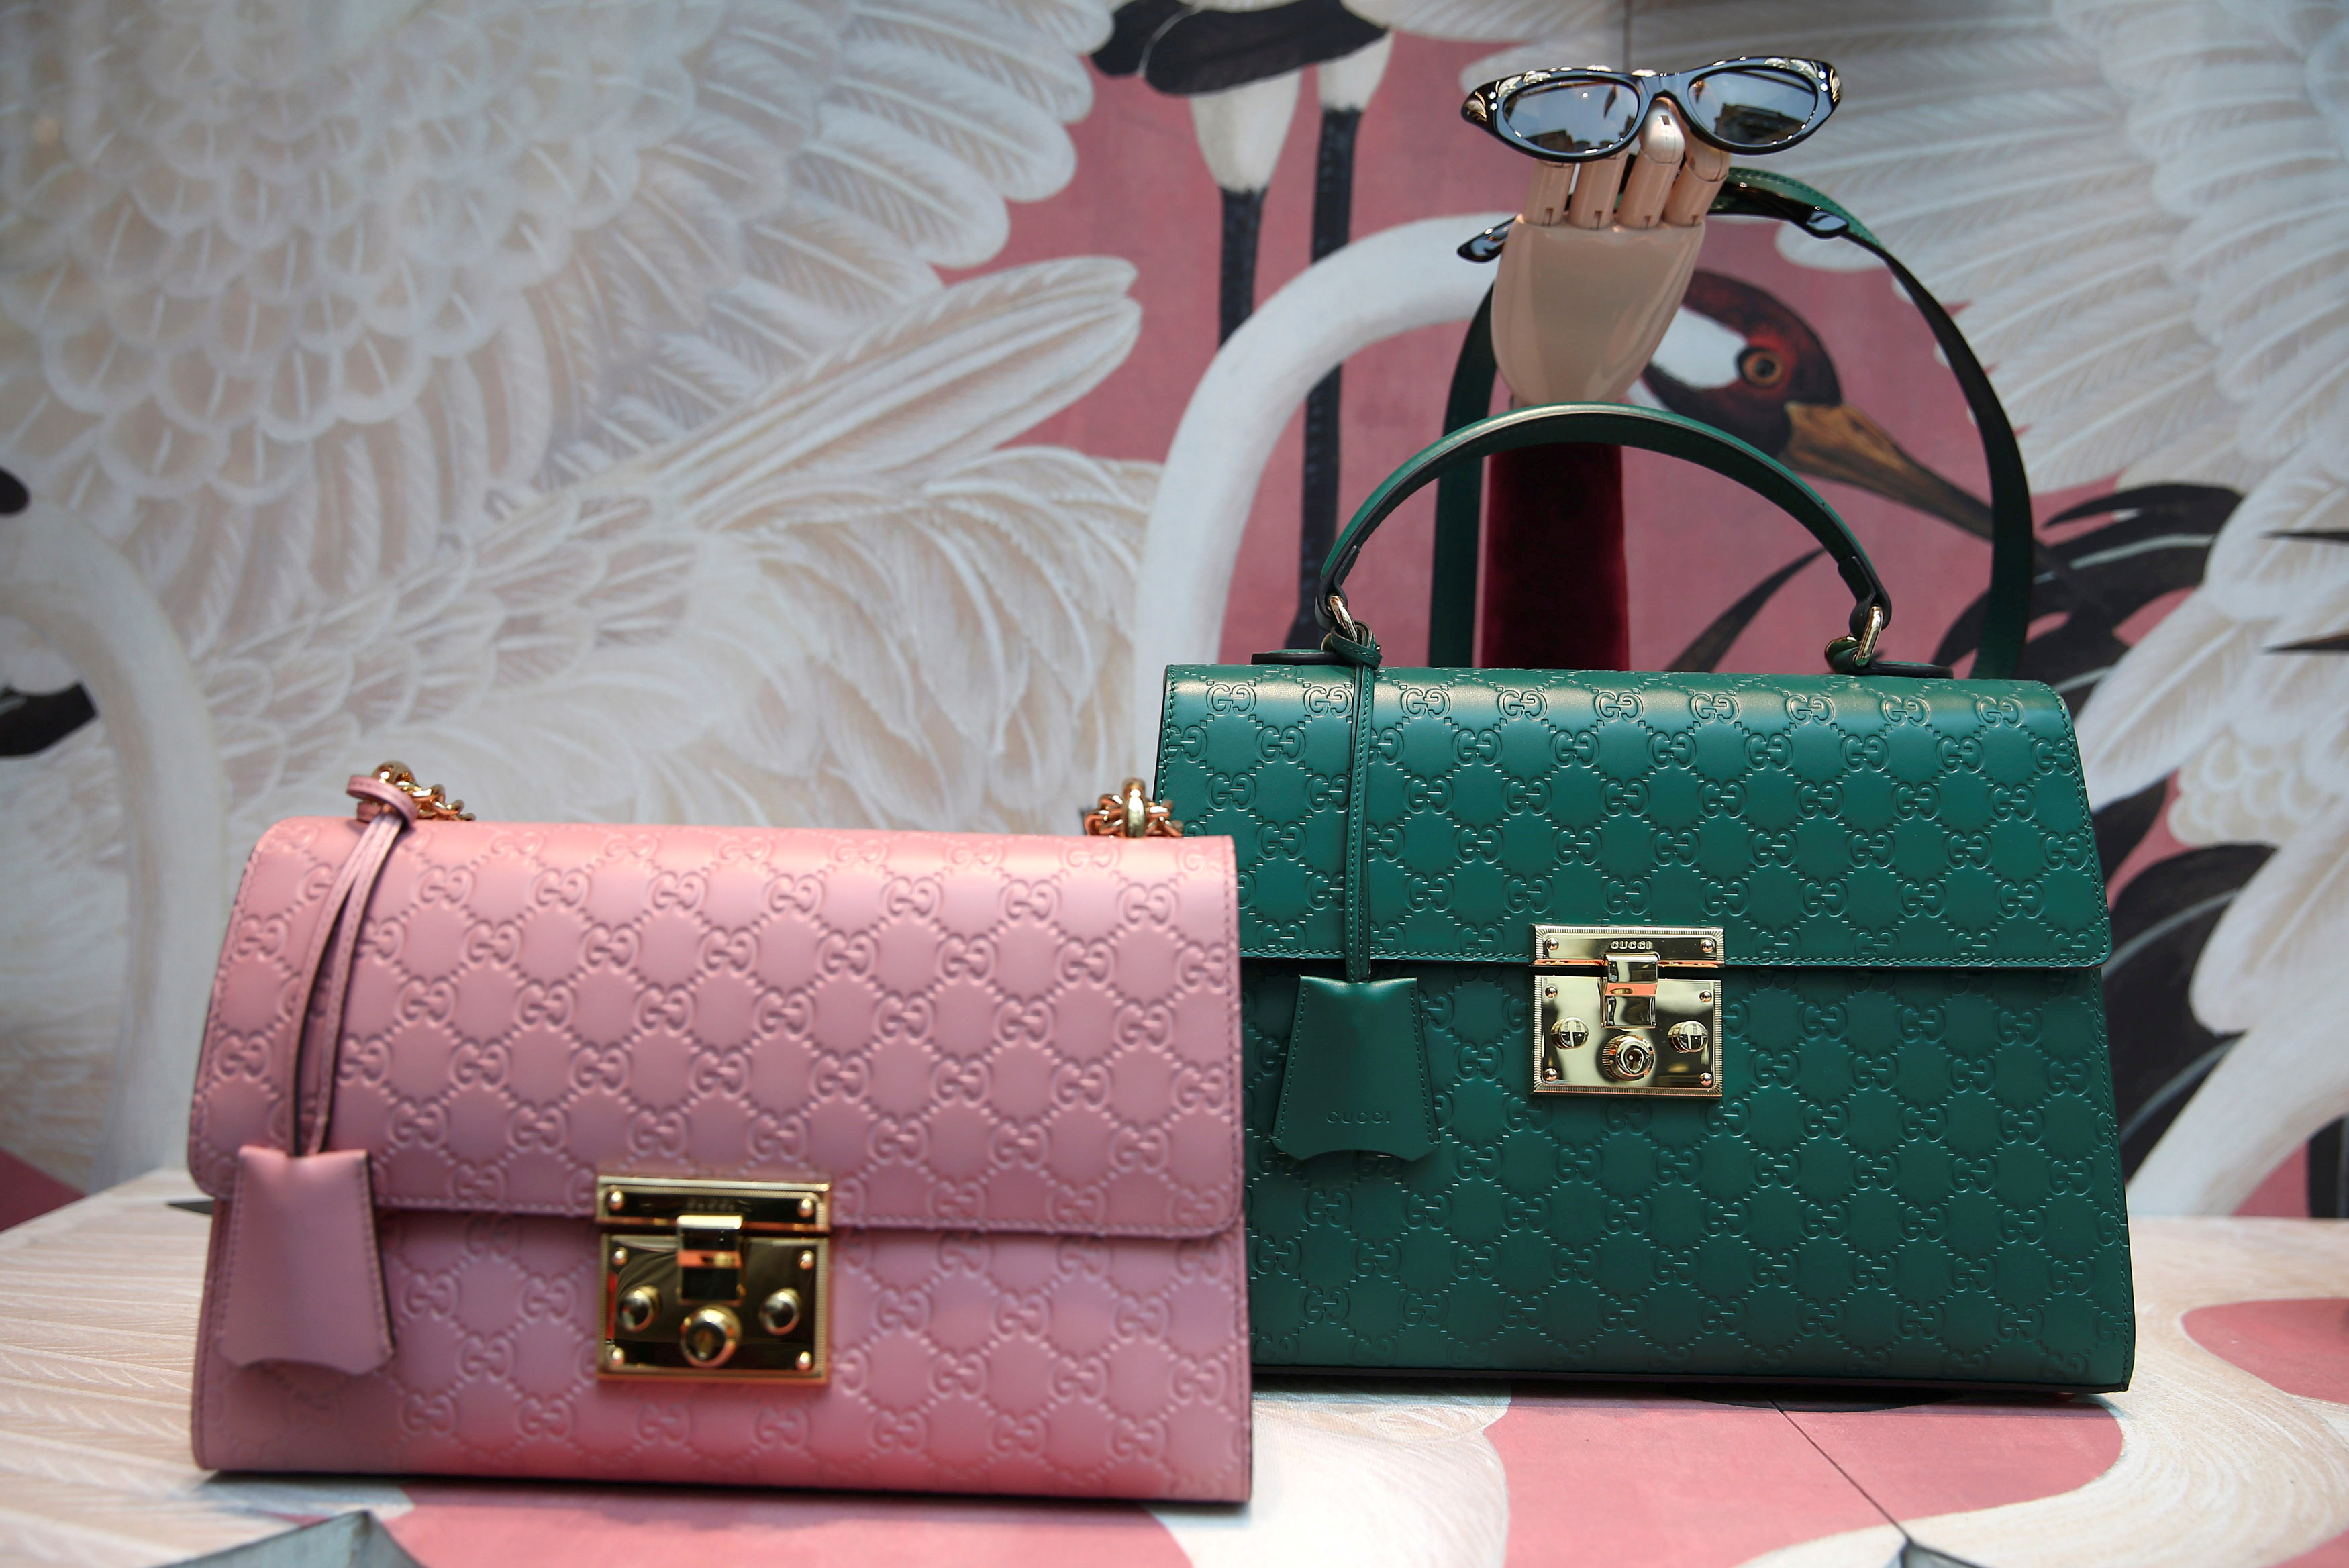 Gucci products are displayed in the window of a store on Old Bond Street in London